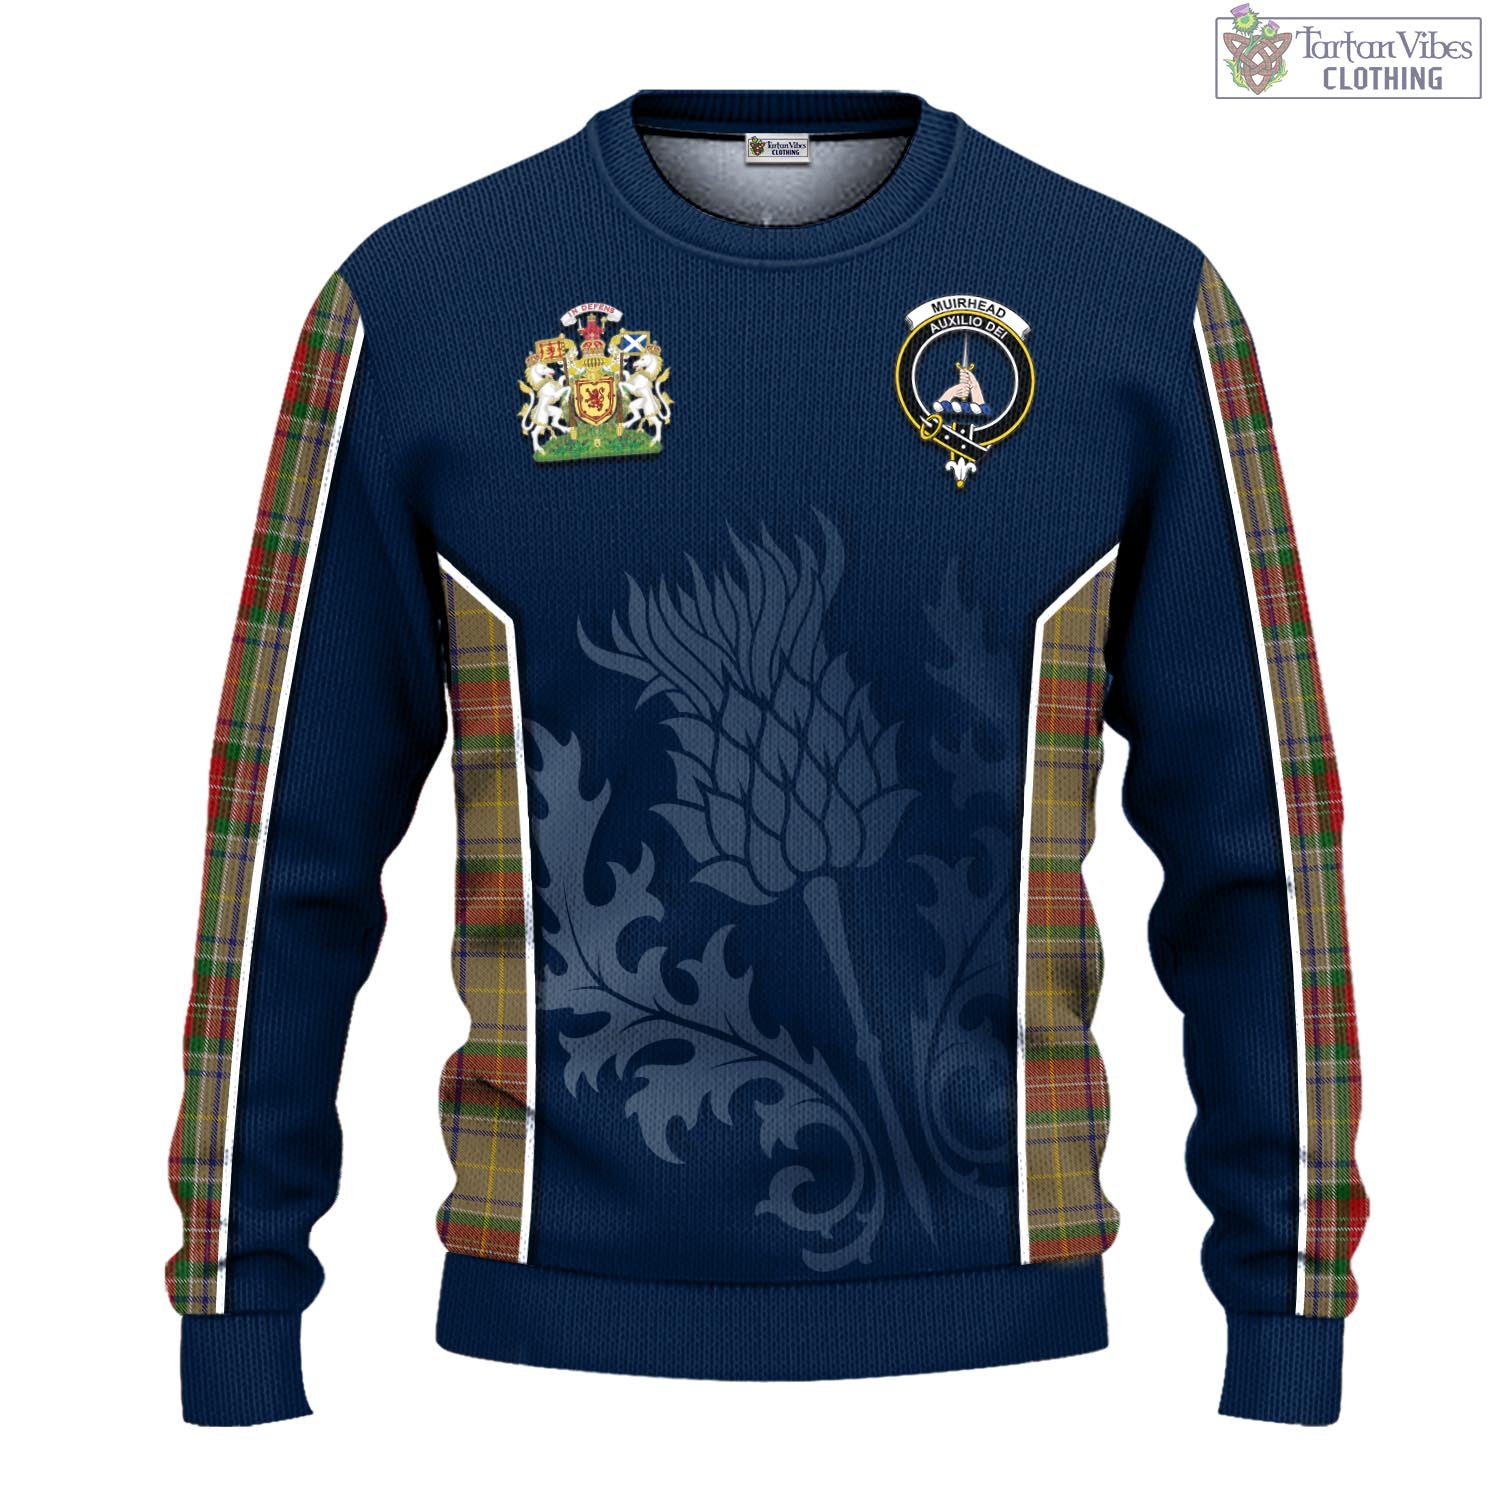 Tartan Vibes Clothing Muirhead Old Tartan Knitted Sweatshirt with Family Crest and Scottish Thistle Vibes Sport Style